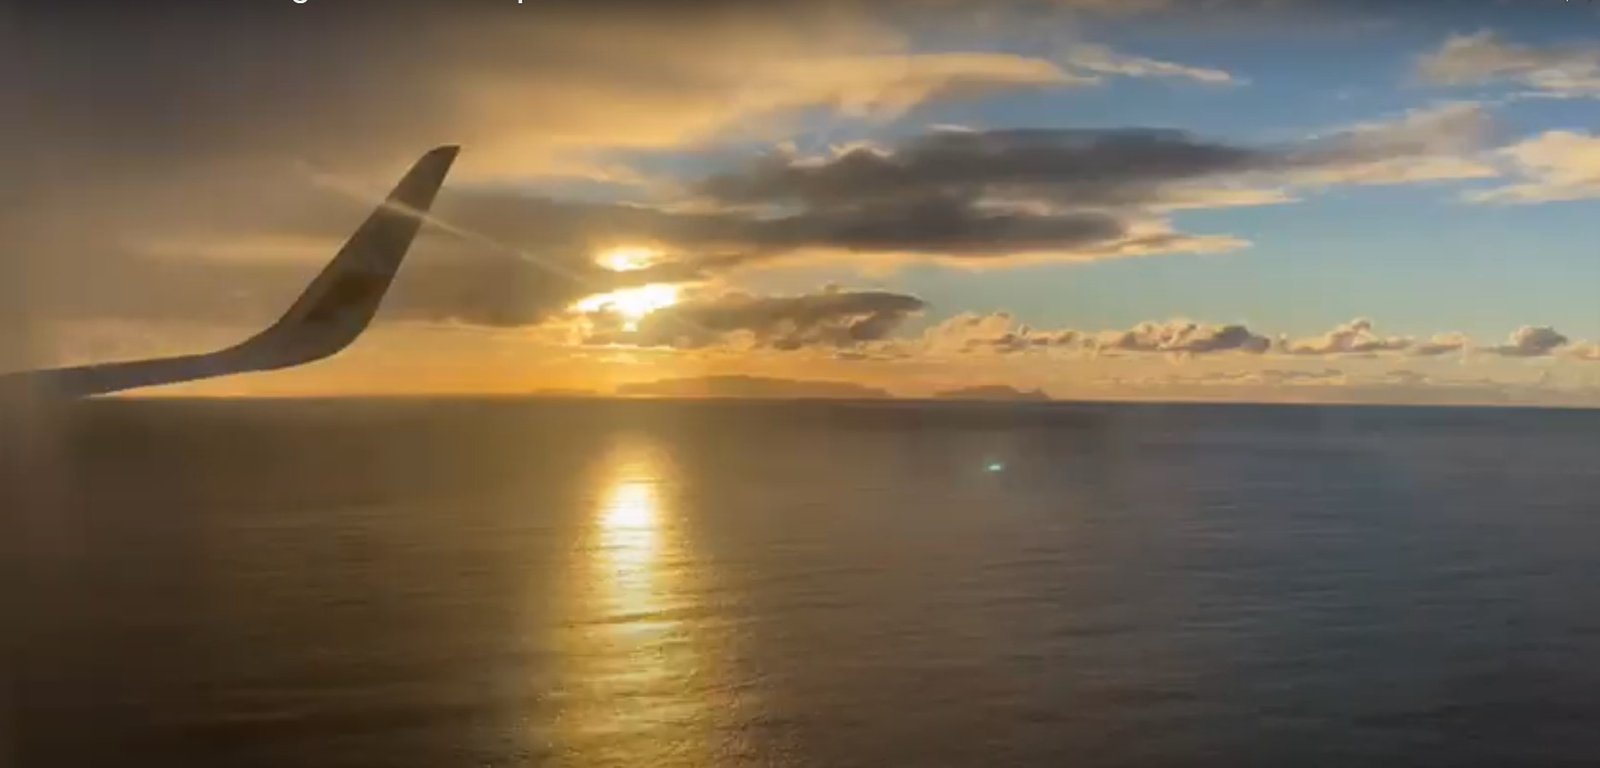 Watch a video of the first New York-Funchal flight from inside the plane